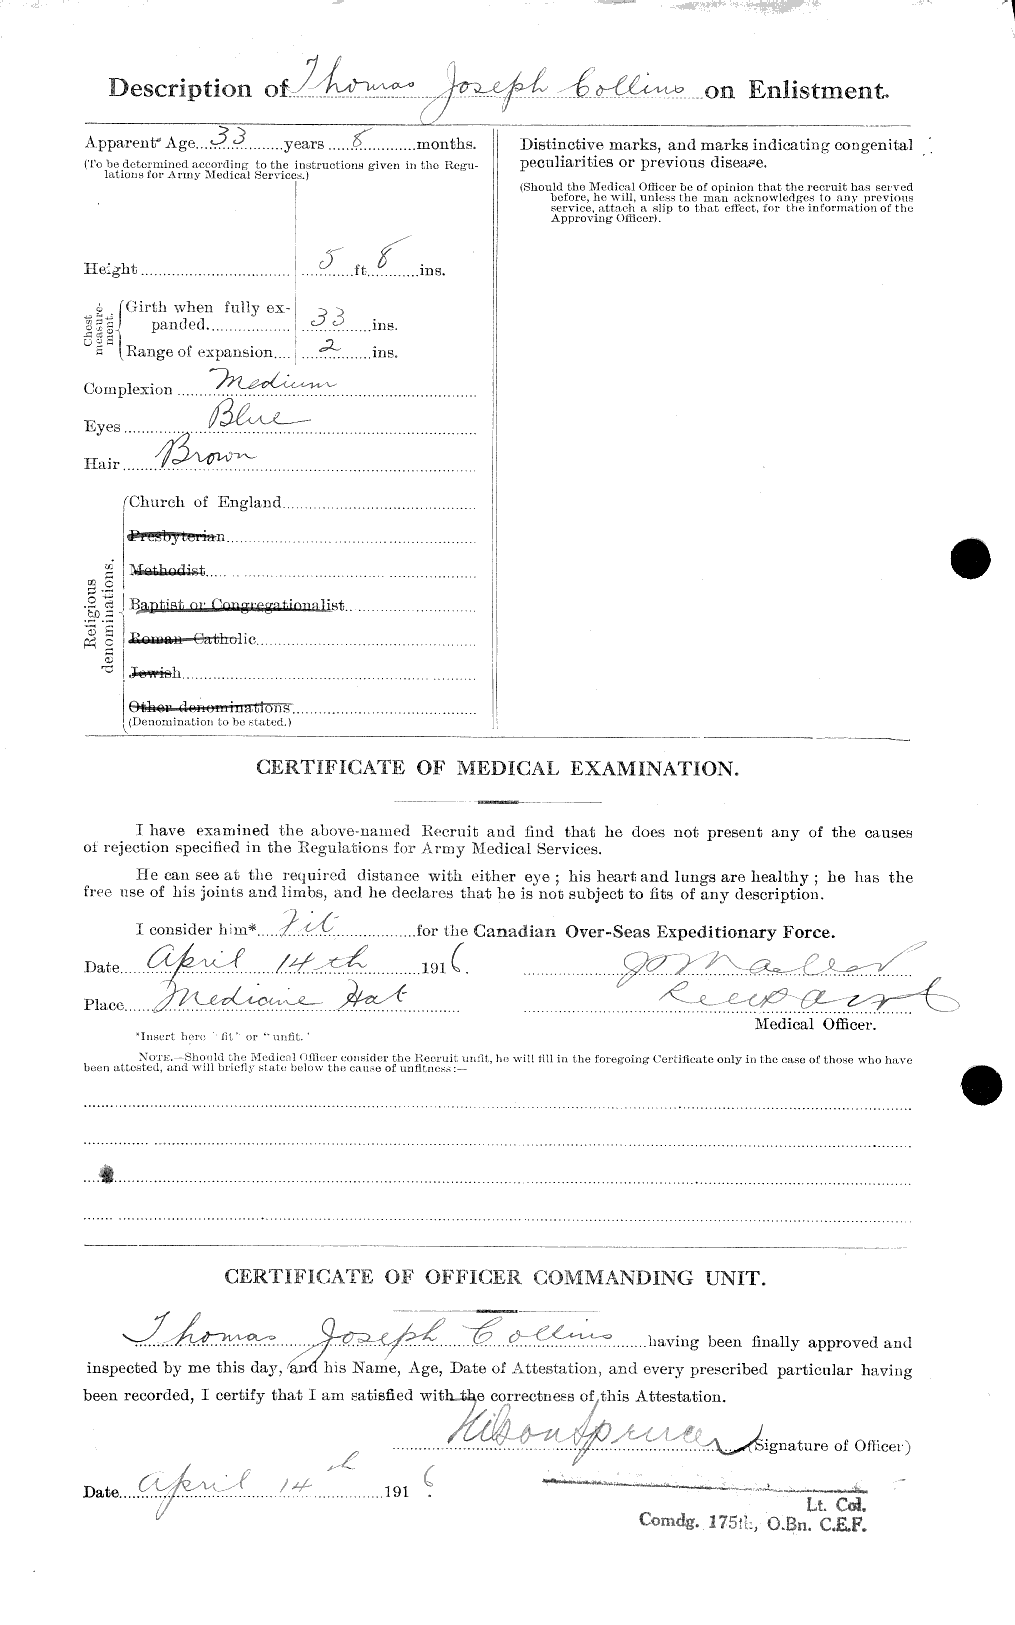 Personnel Records of the First World War - CEF 040668b